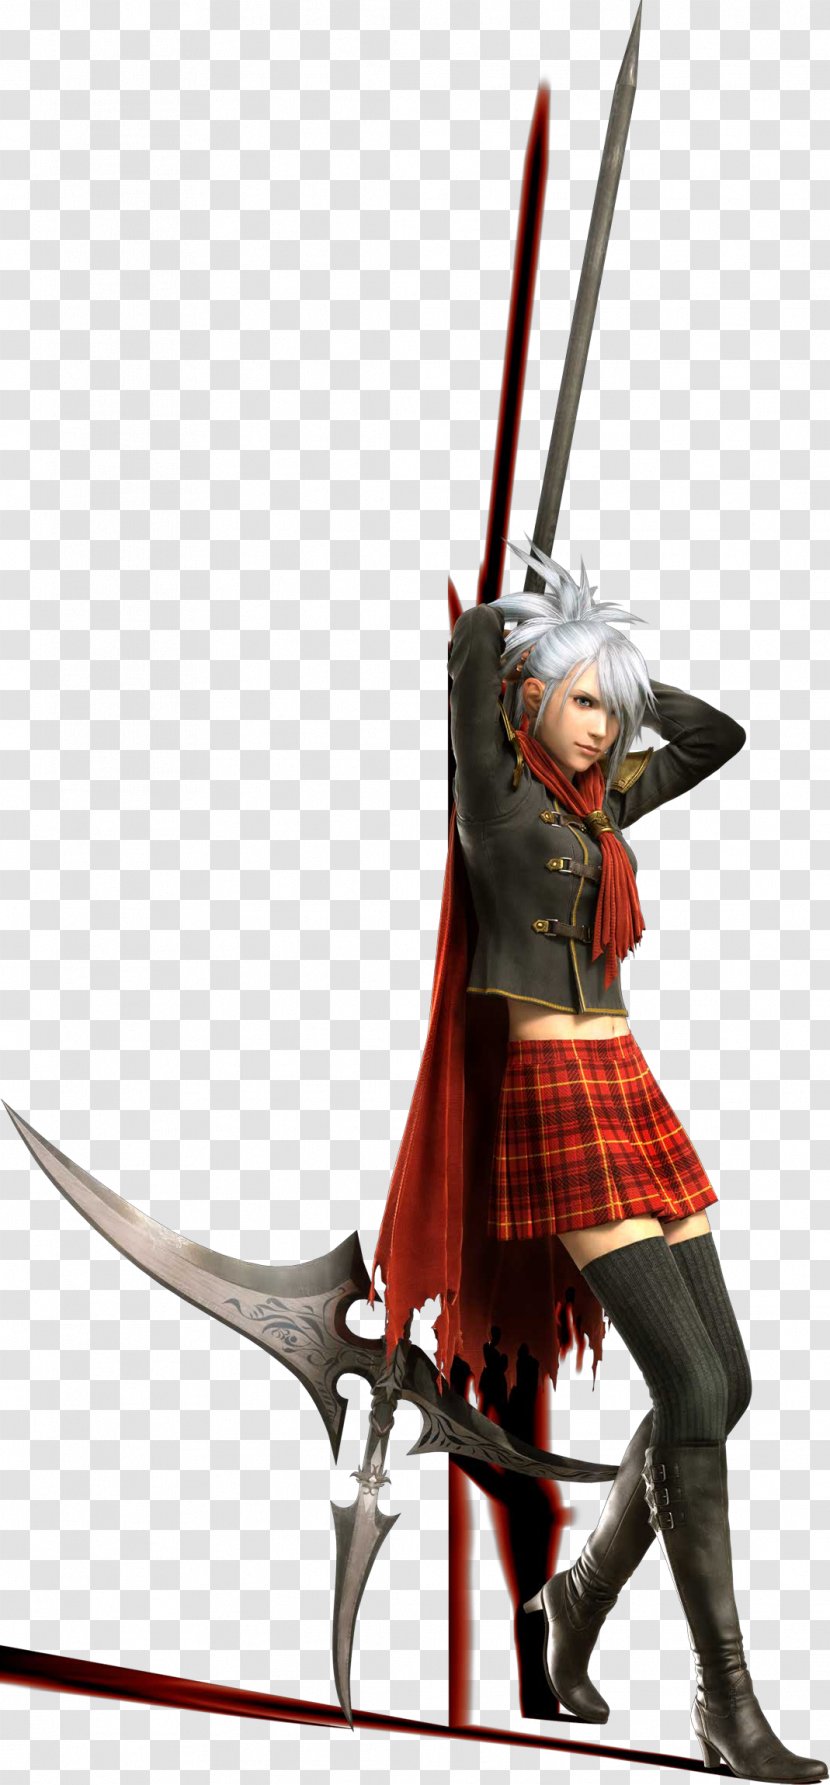 Final Fantasy Type-0 Lightning Returns: XIII Agito VII - Cold Weapon Transparent PNG